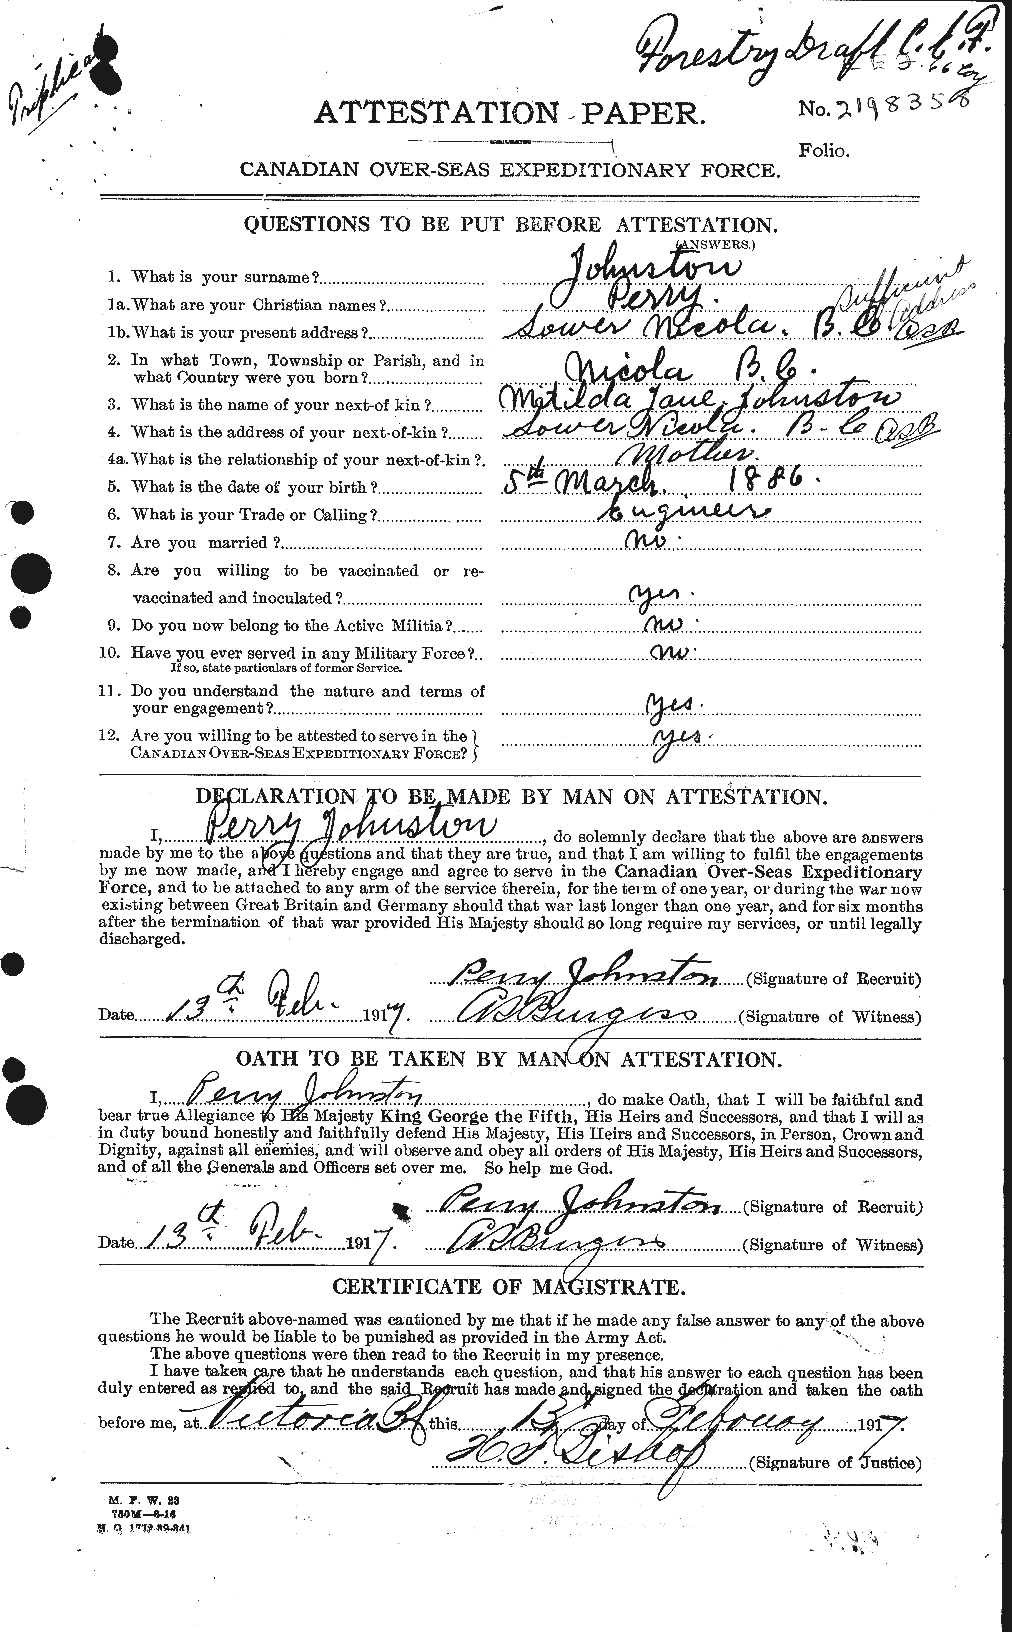 Personnel Records of the First World War - CEF 423034a